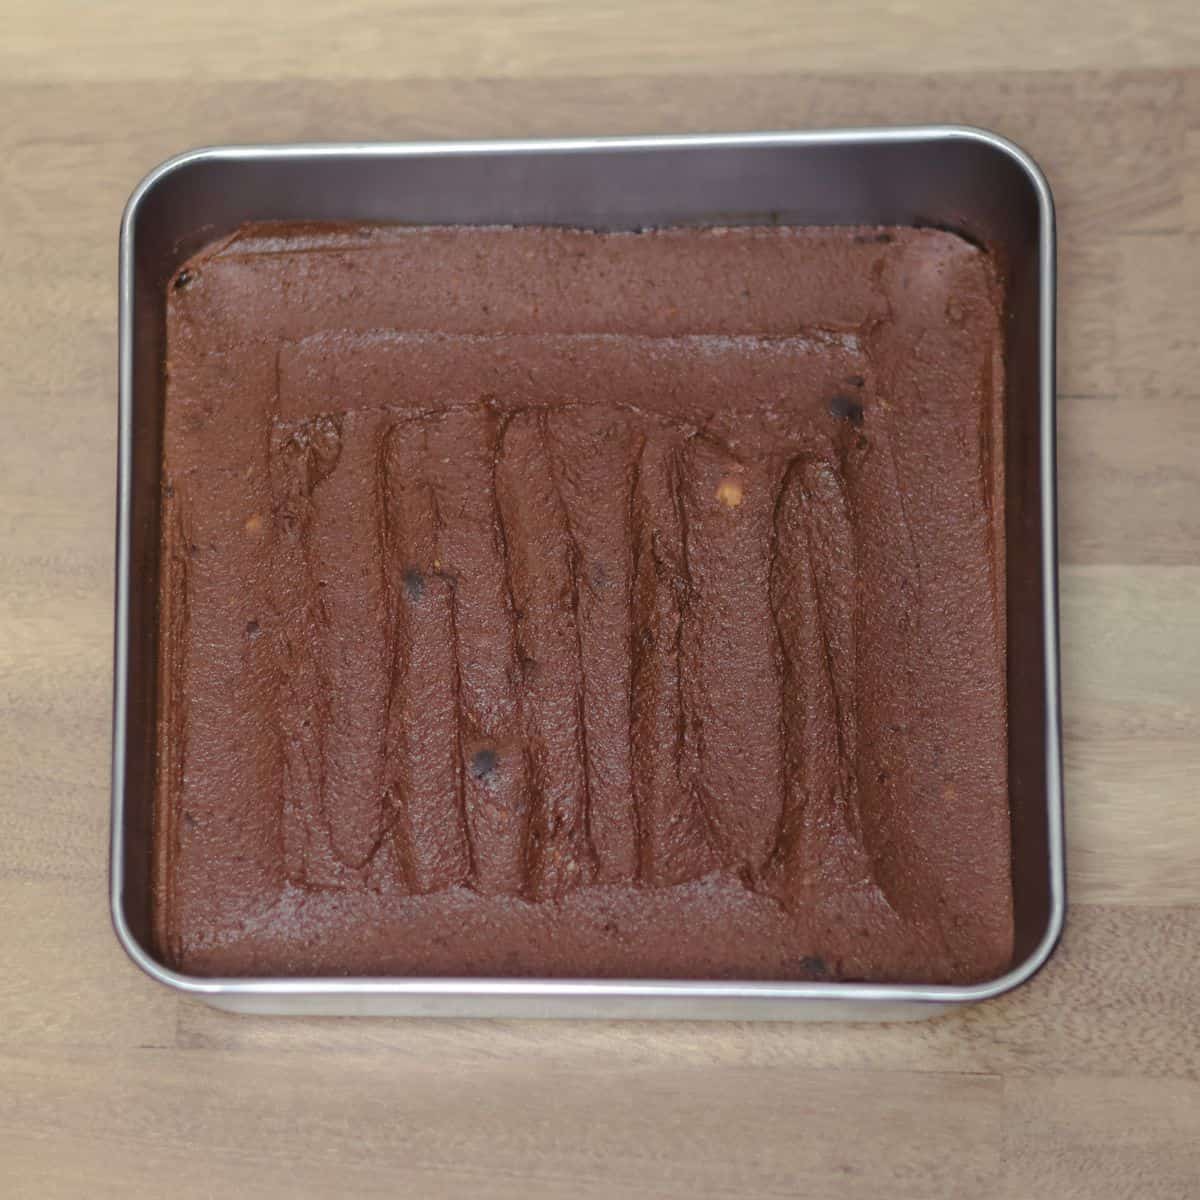 An 8x8 inch baking pan filled with smooth, freshly baked sweet potato protein brownie, showing the even surface of the finished bake.